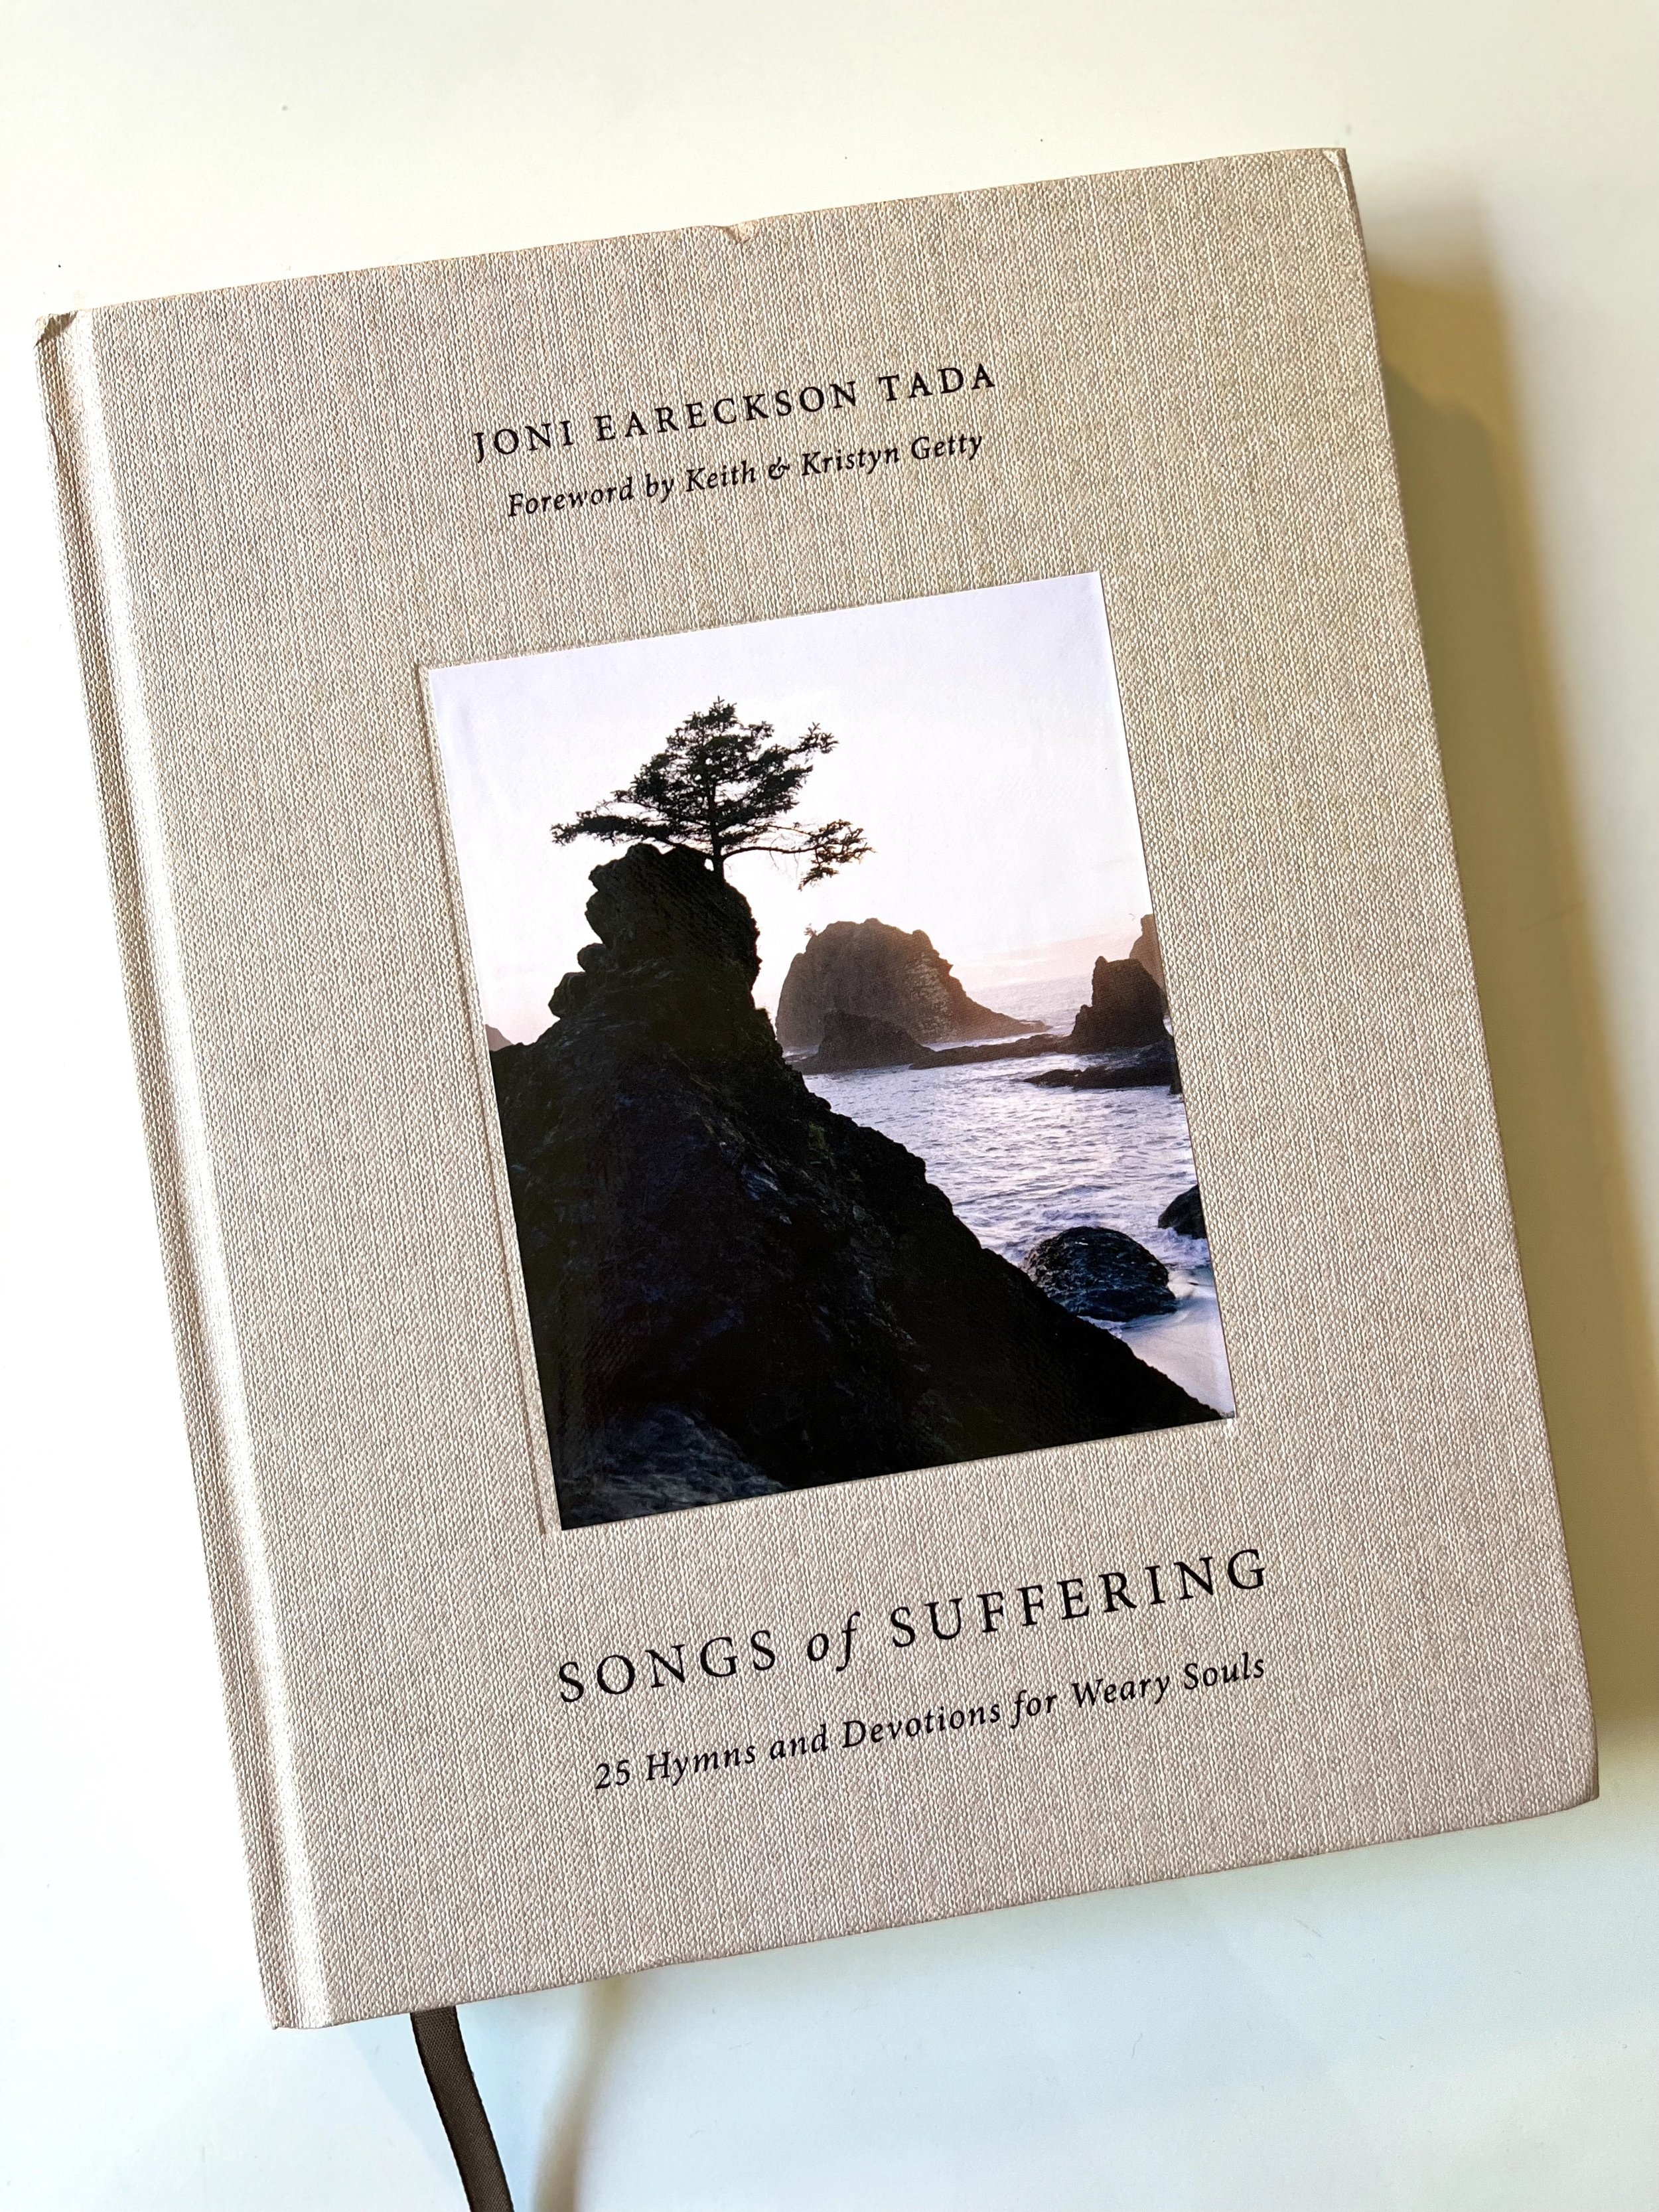 Book Review: Songs of Suffering